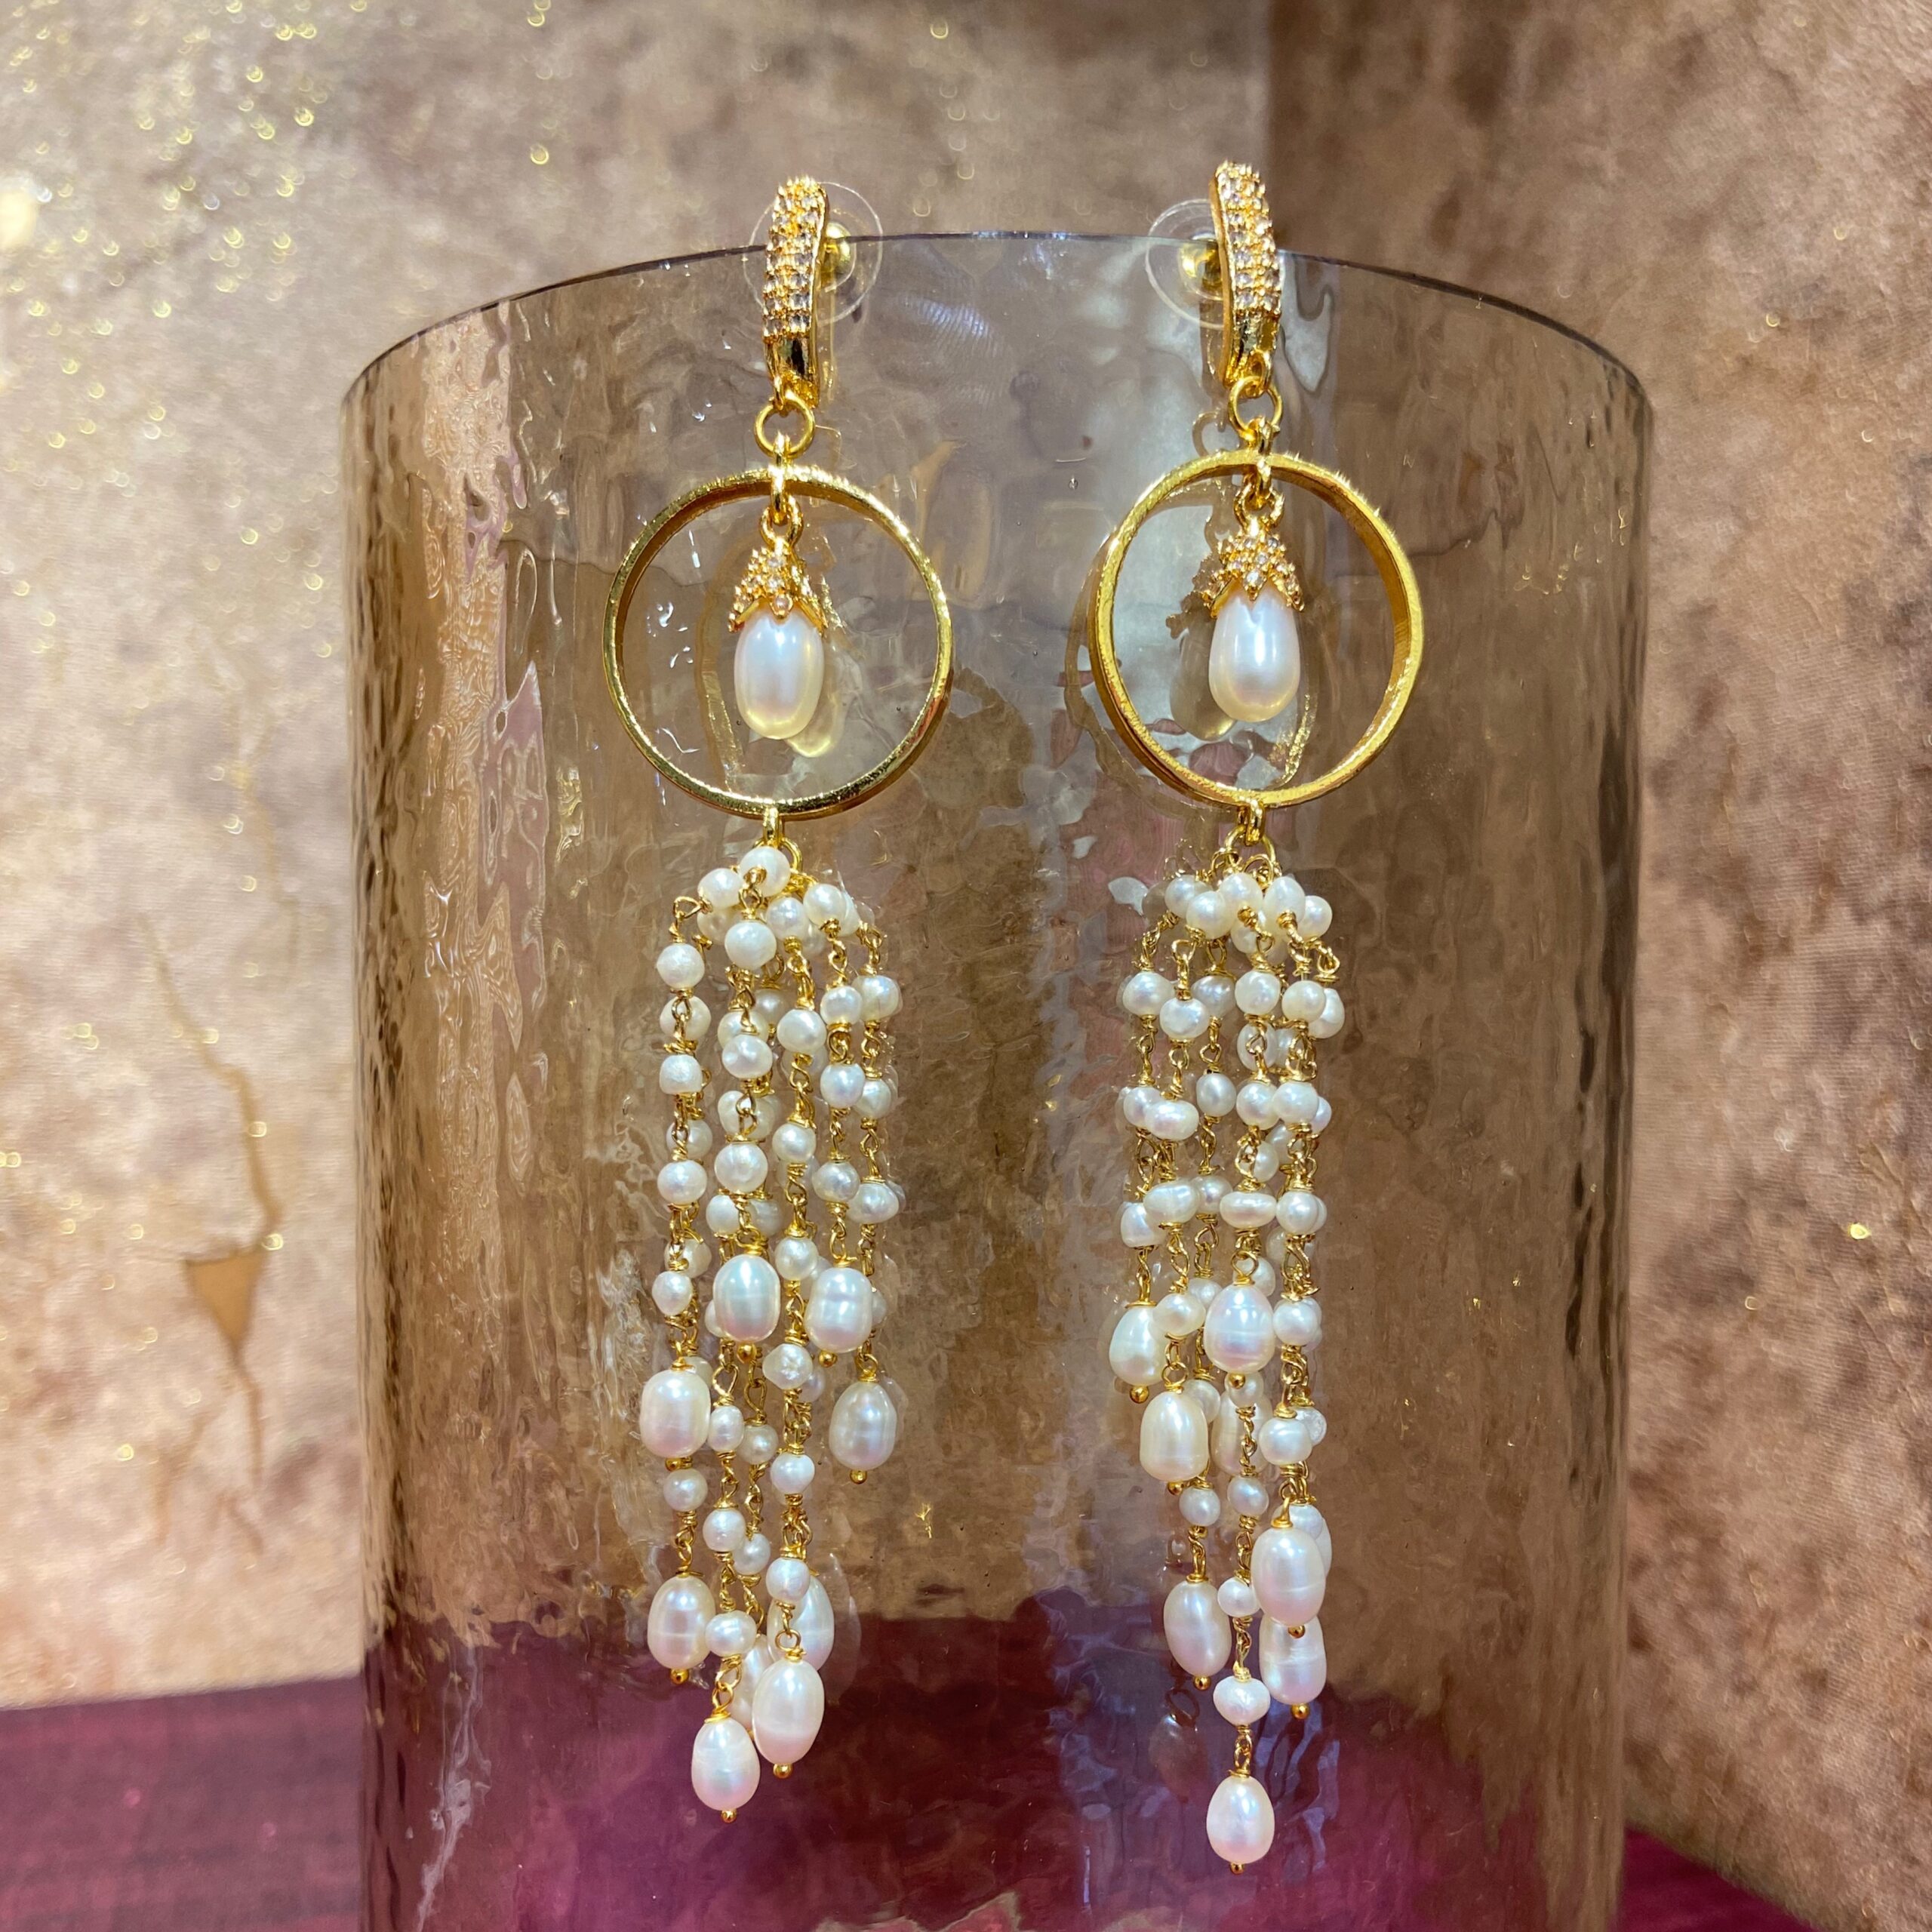 Designer Long Earrings Featuring Seed Pearls & White Oval Pearls